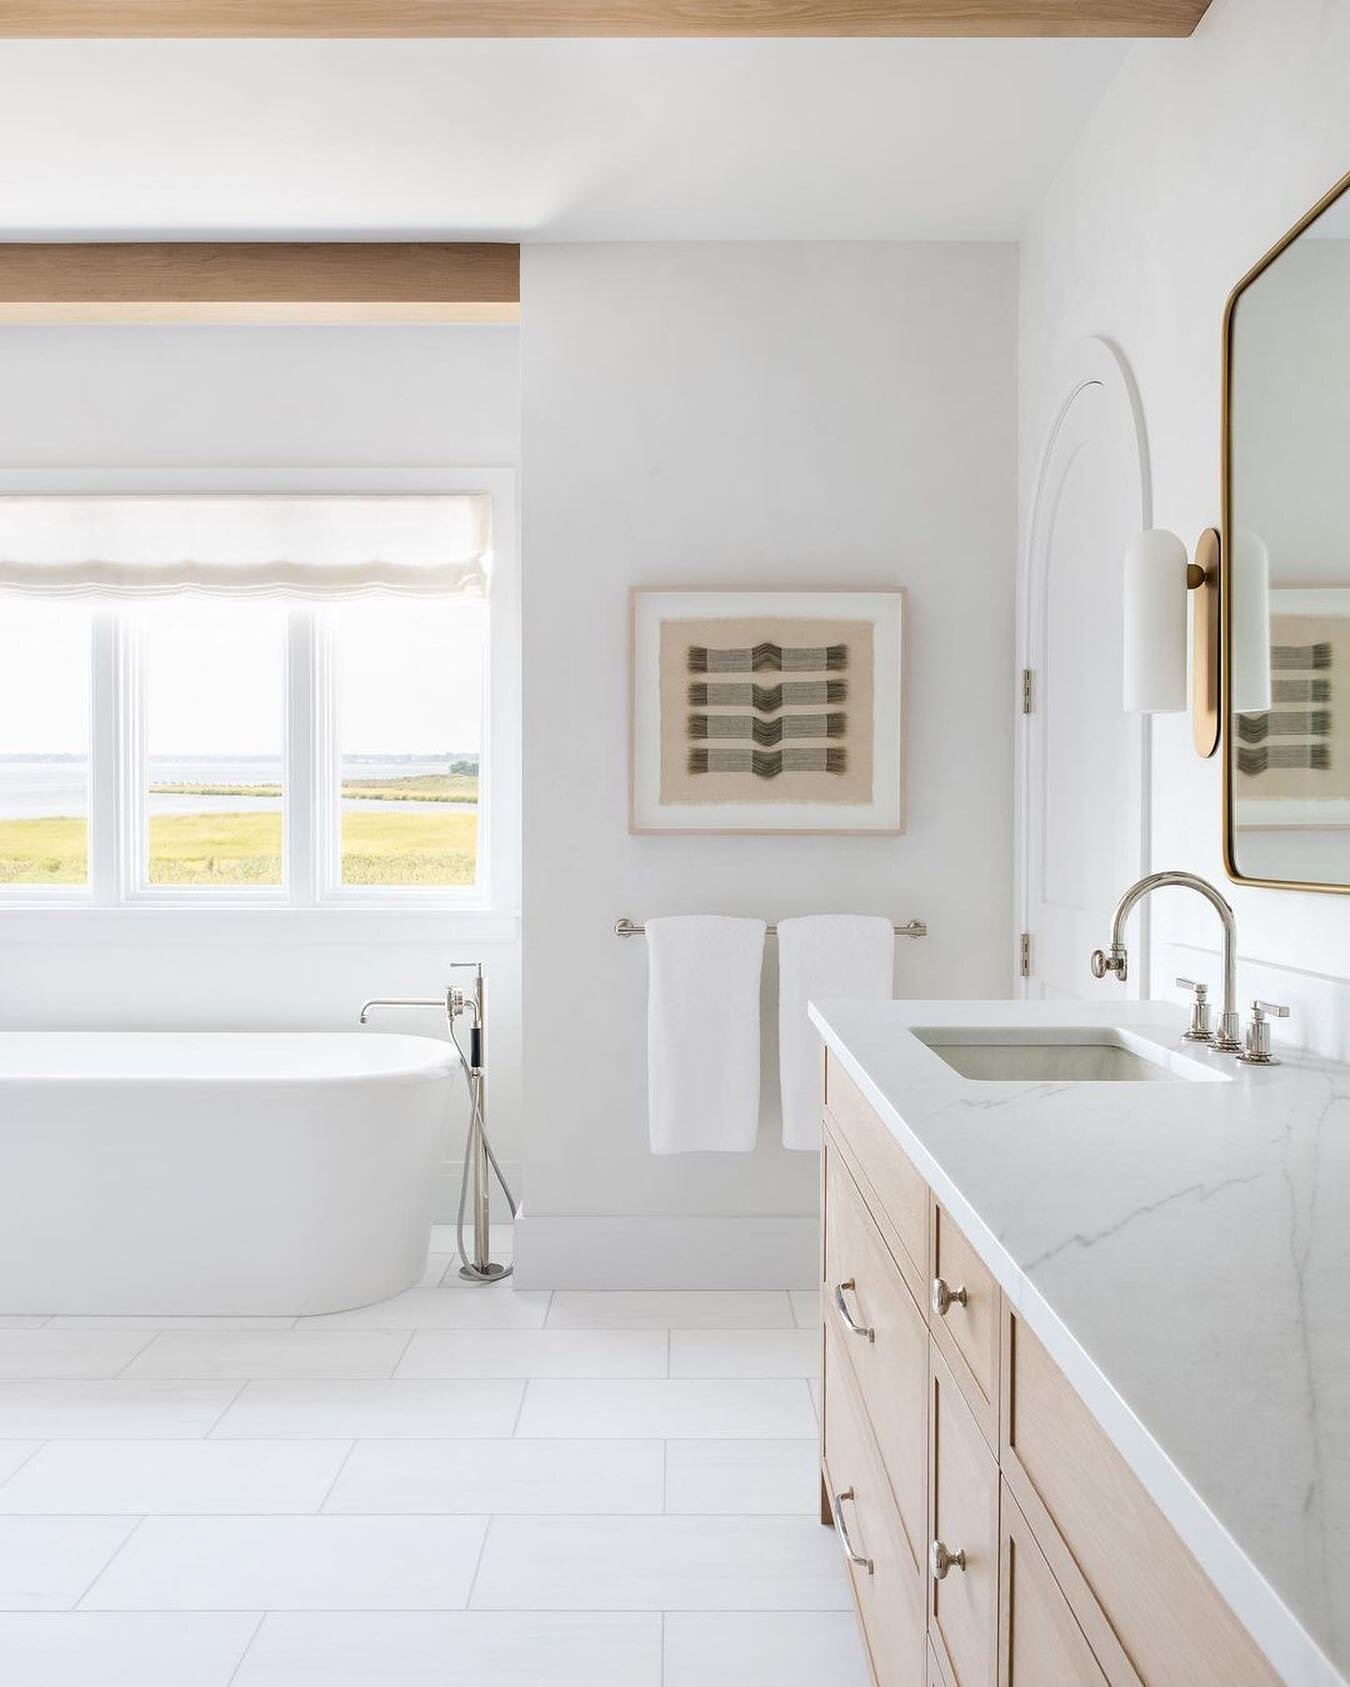 Love the simplicity of this bathroom + the view that goes on for miles 👀 Design by @changoandco⁠
&bull;⁠
&bull;⁠
&bull;⁠
&bull;⁠
#designinspo #inspotoyourhome #homedecor #interiordesigner #interiorinspiration #homedesign #interiordecor #interiorinsp